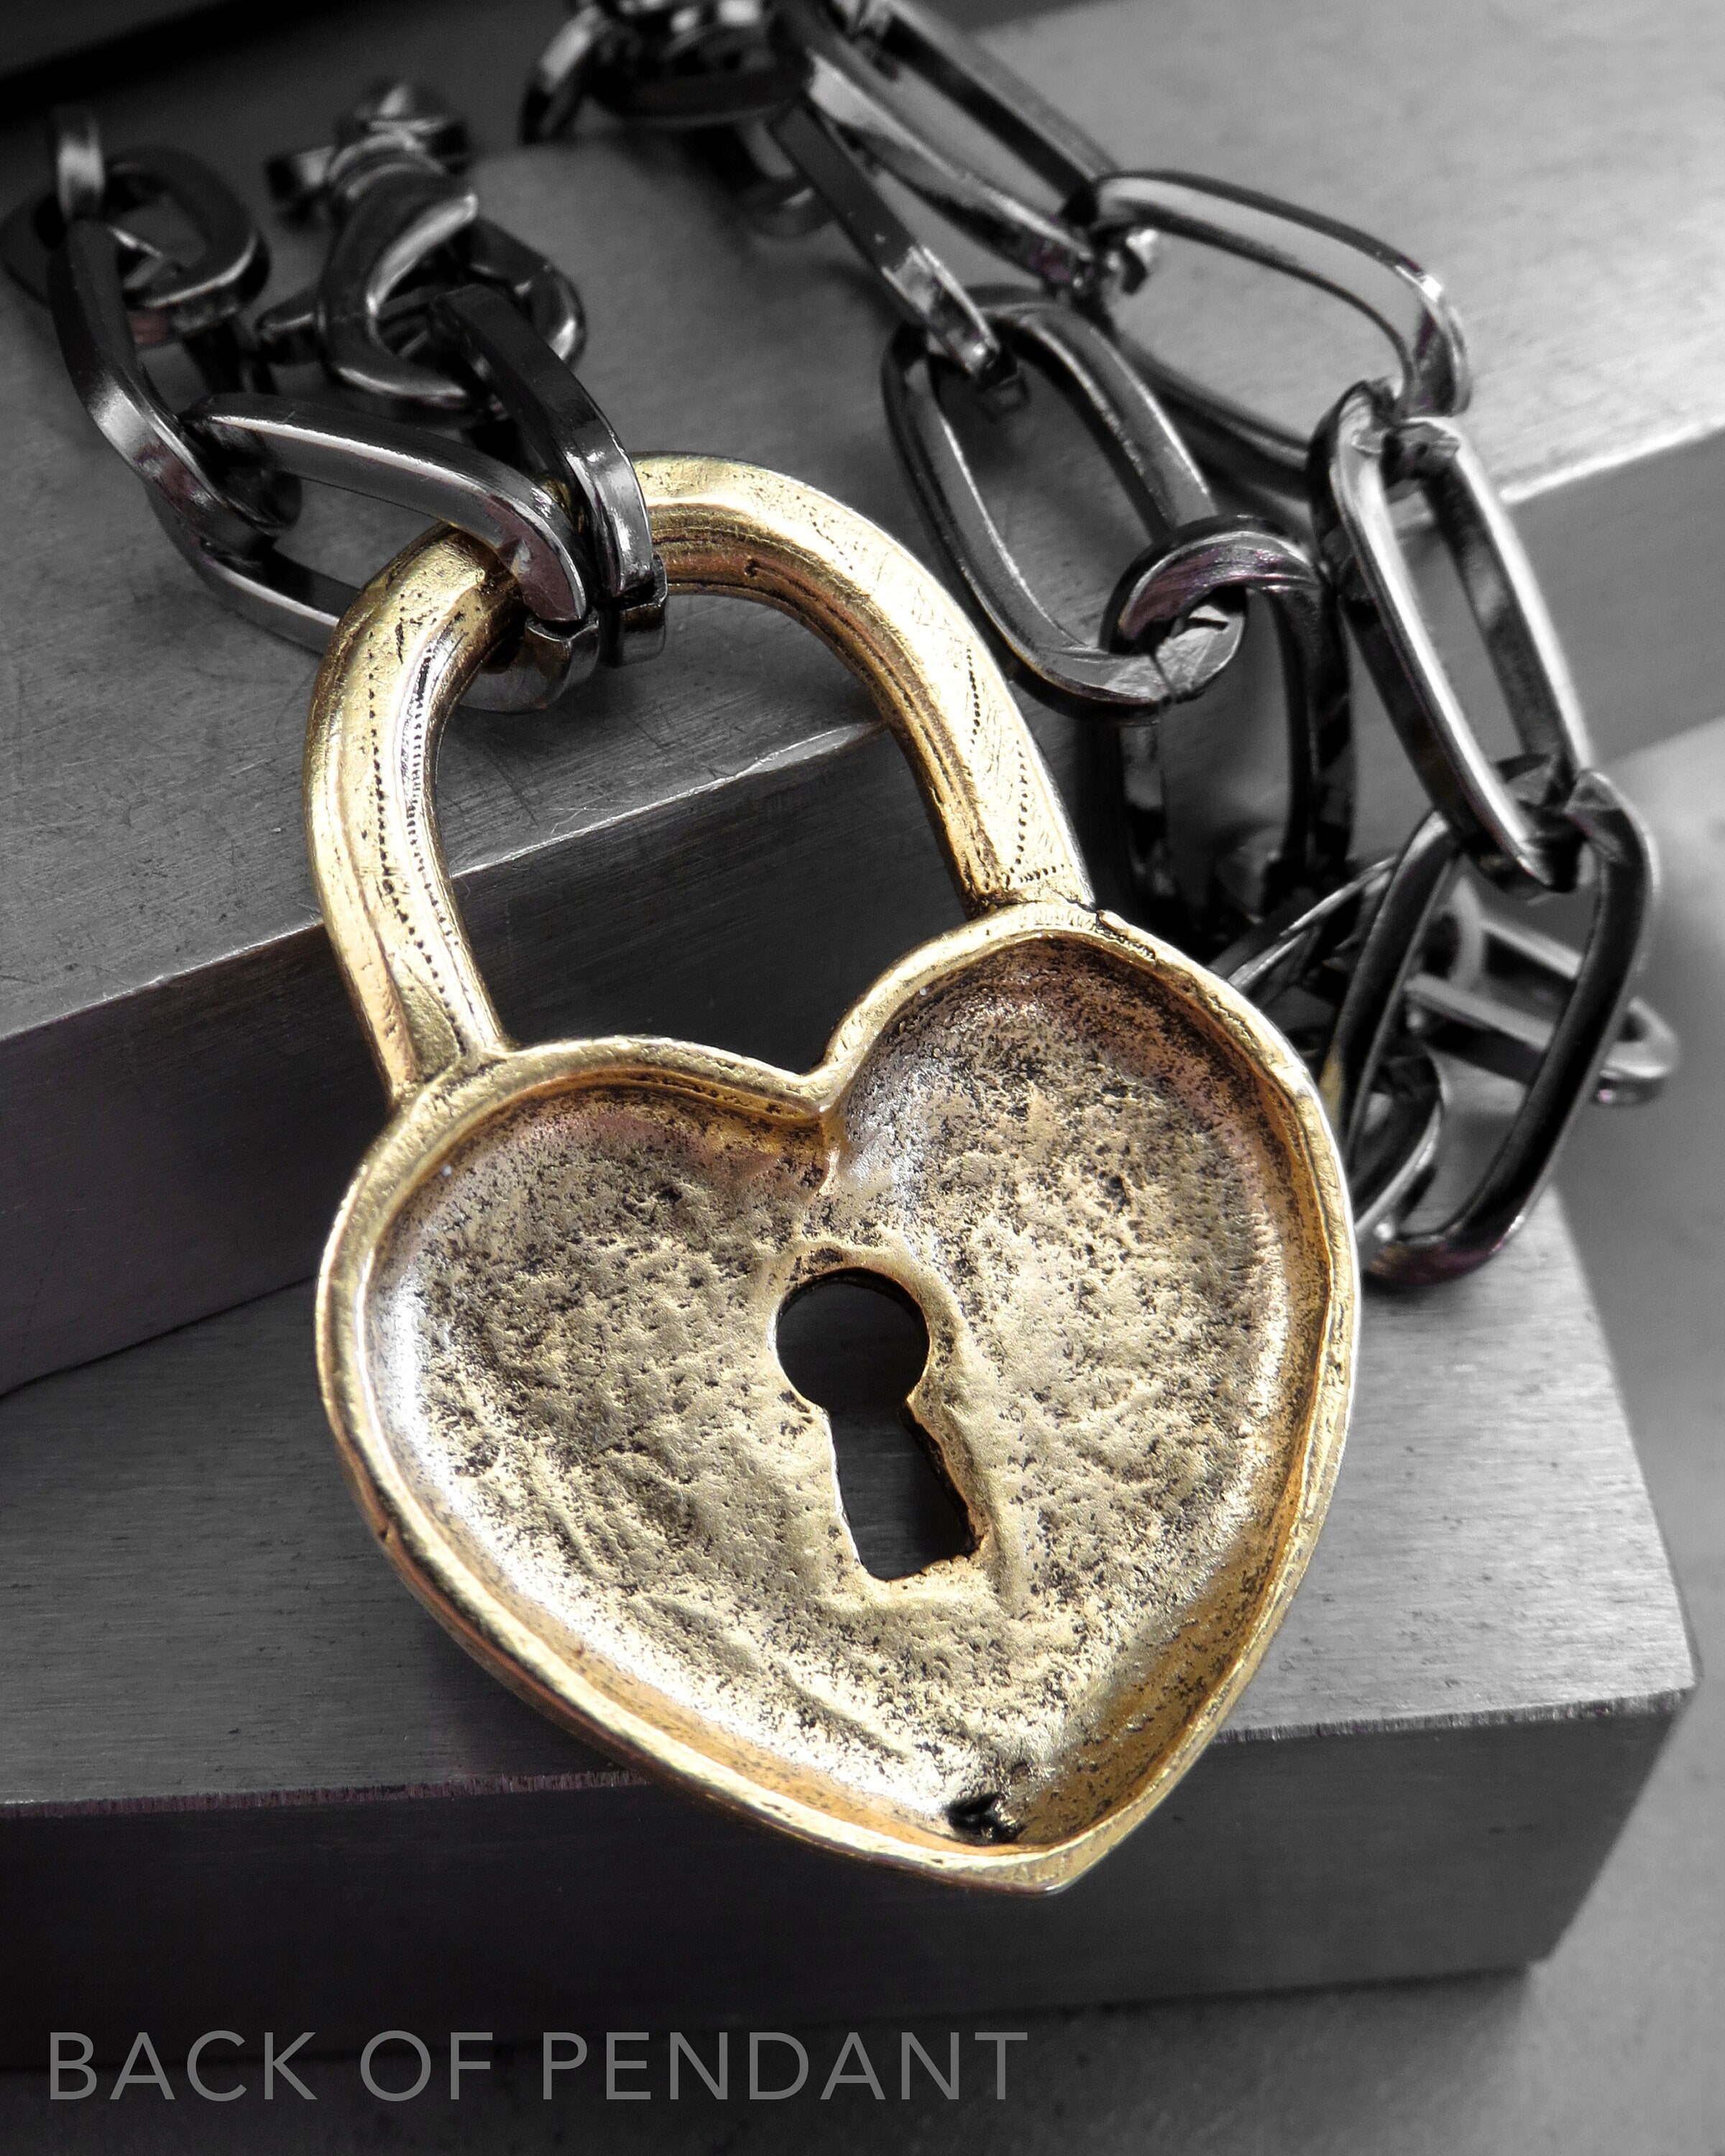 HEART of GOLD - Gold Heart Lock Necklace - Golden Heart Lock Pendant with Chunky Black Chain - Edgy Gothic Goth Valentine's Day Jewelry